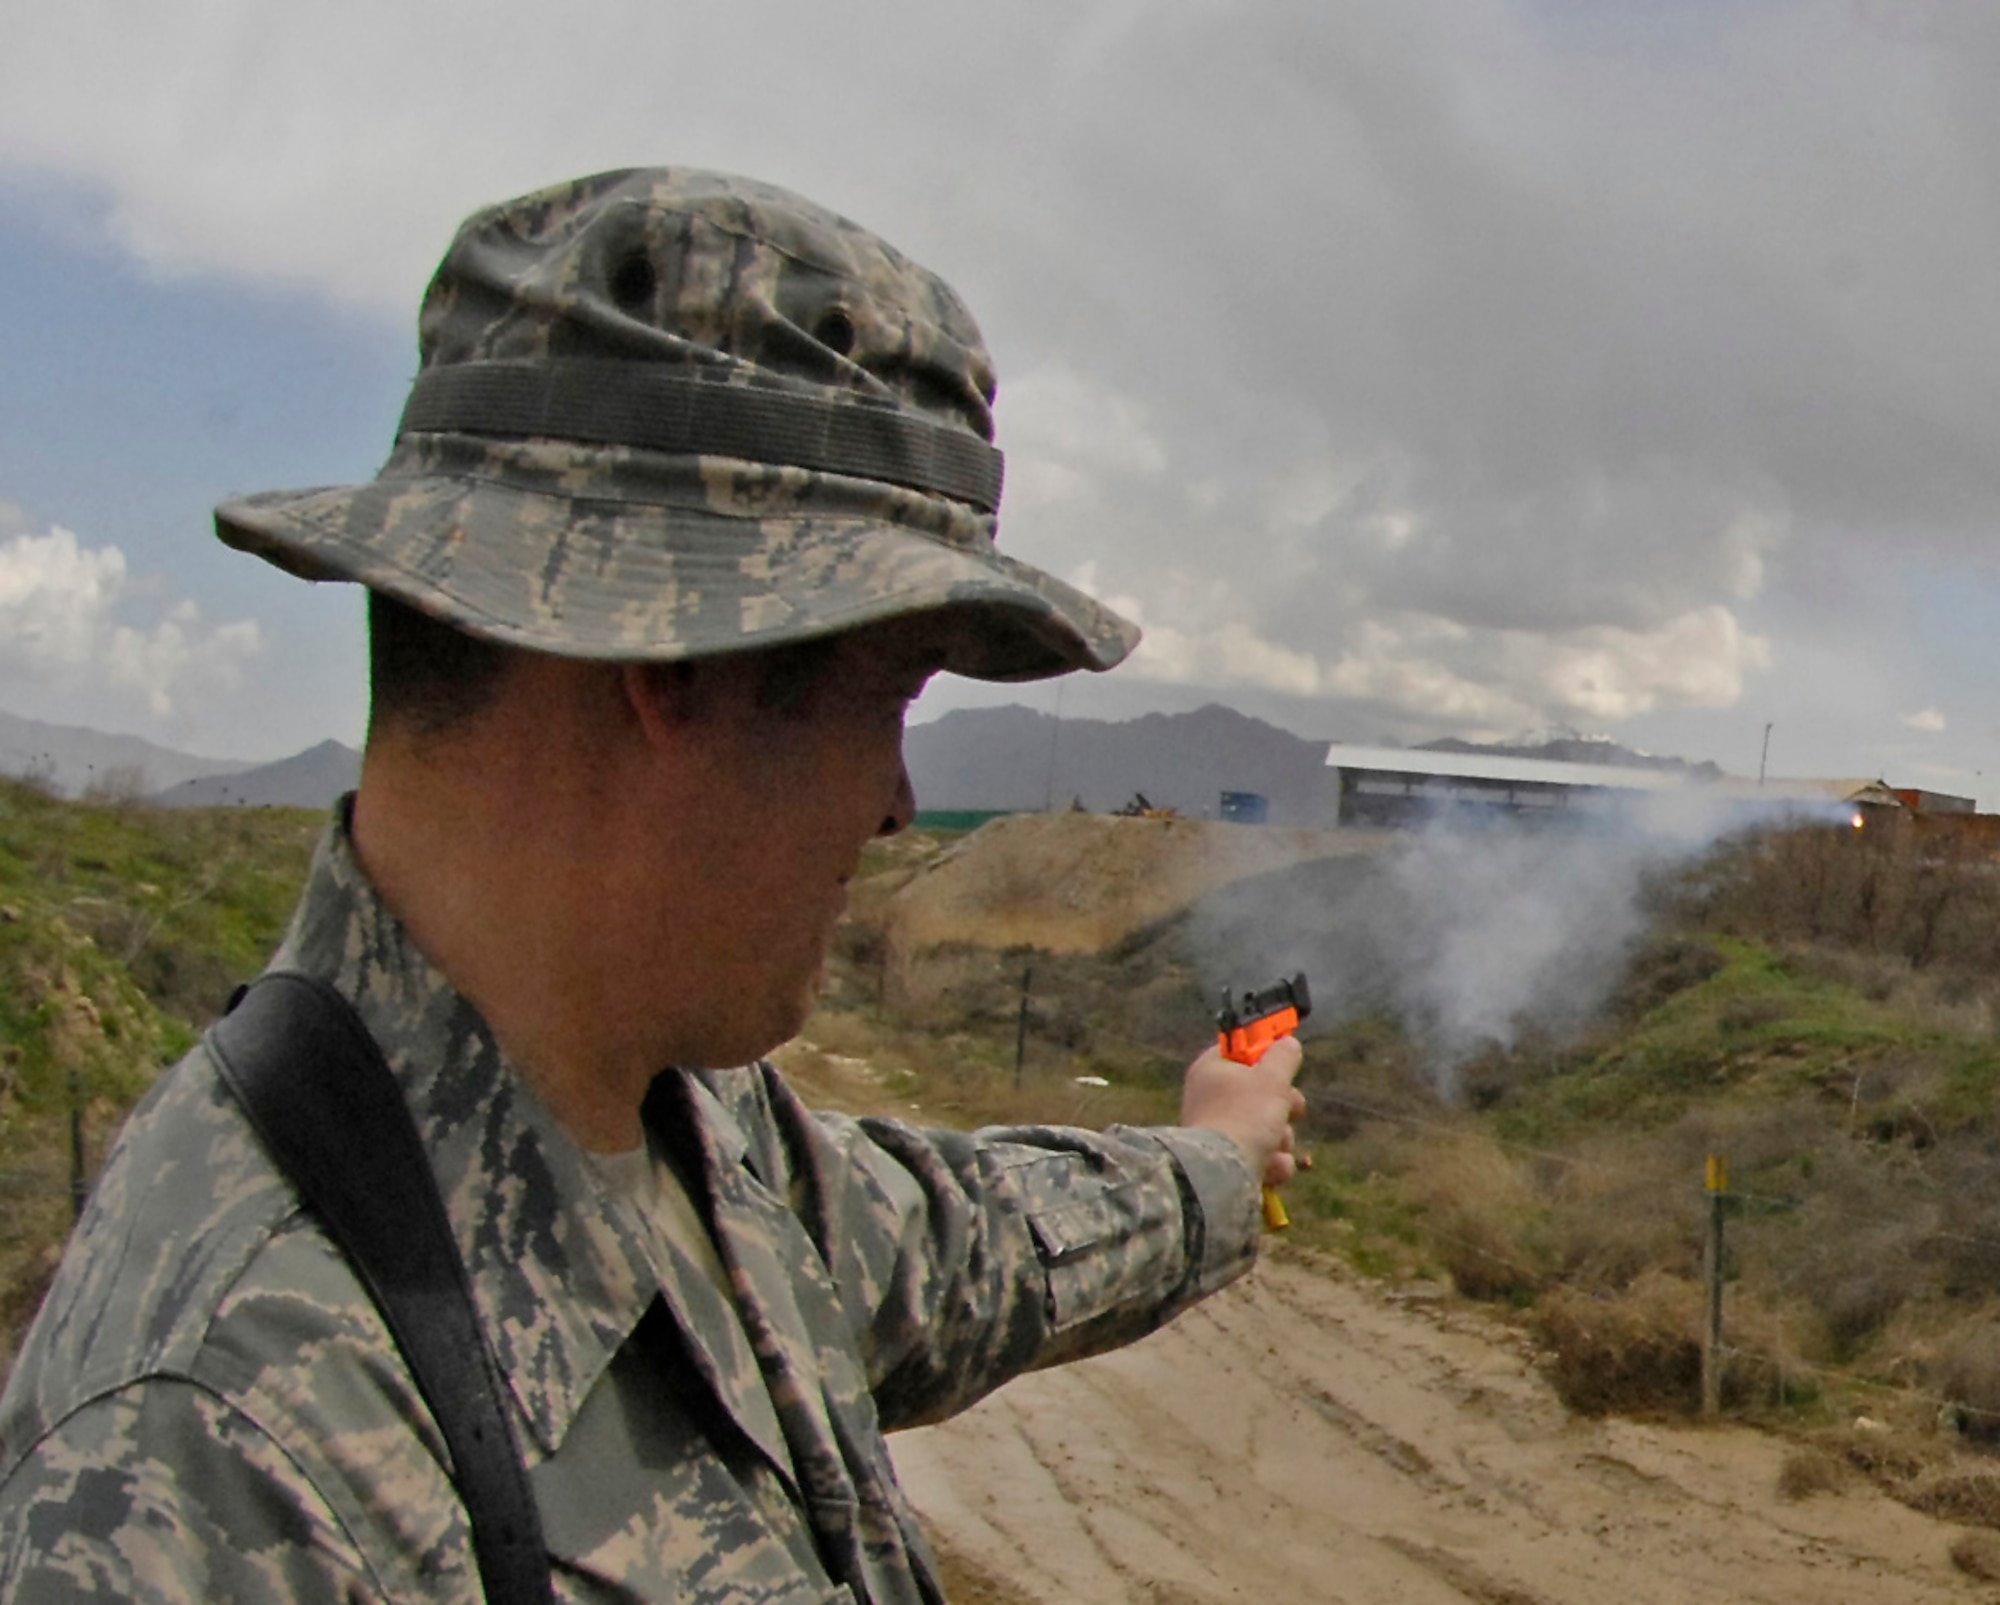 Tech. Sgt. Shane Sweeney, 455th Air Expeditionary Wing weapons safety, fires off pyrotechnics that helps scare off birds near the flightline March 29. The seven-member team of safety experts here patrol hot spots around the airfield's flightline to minimize the threat of bird strikes on the various aircraft taking off and landing.